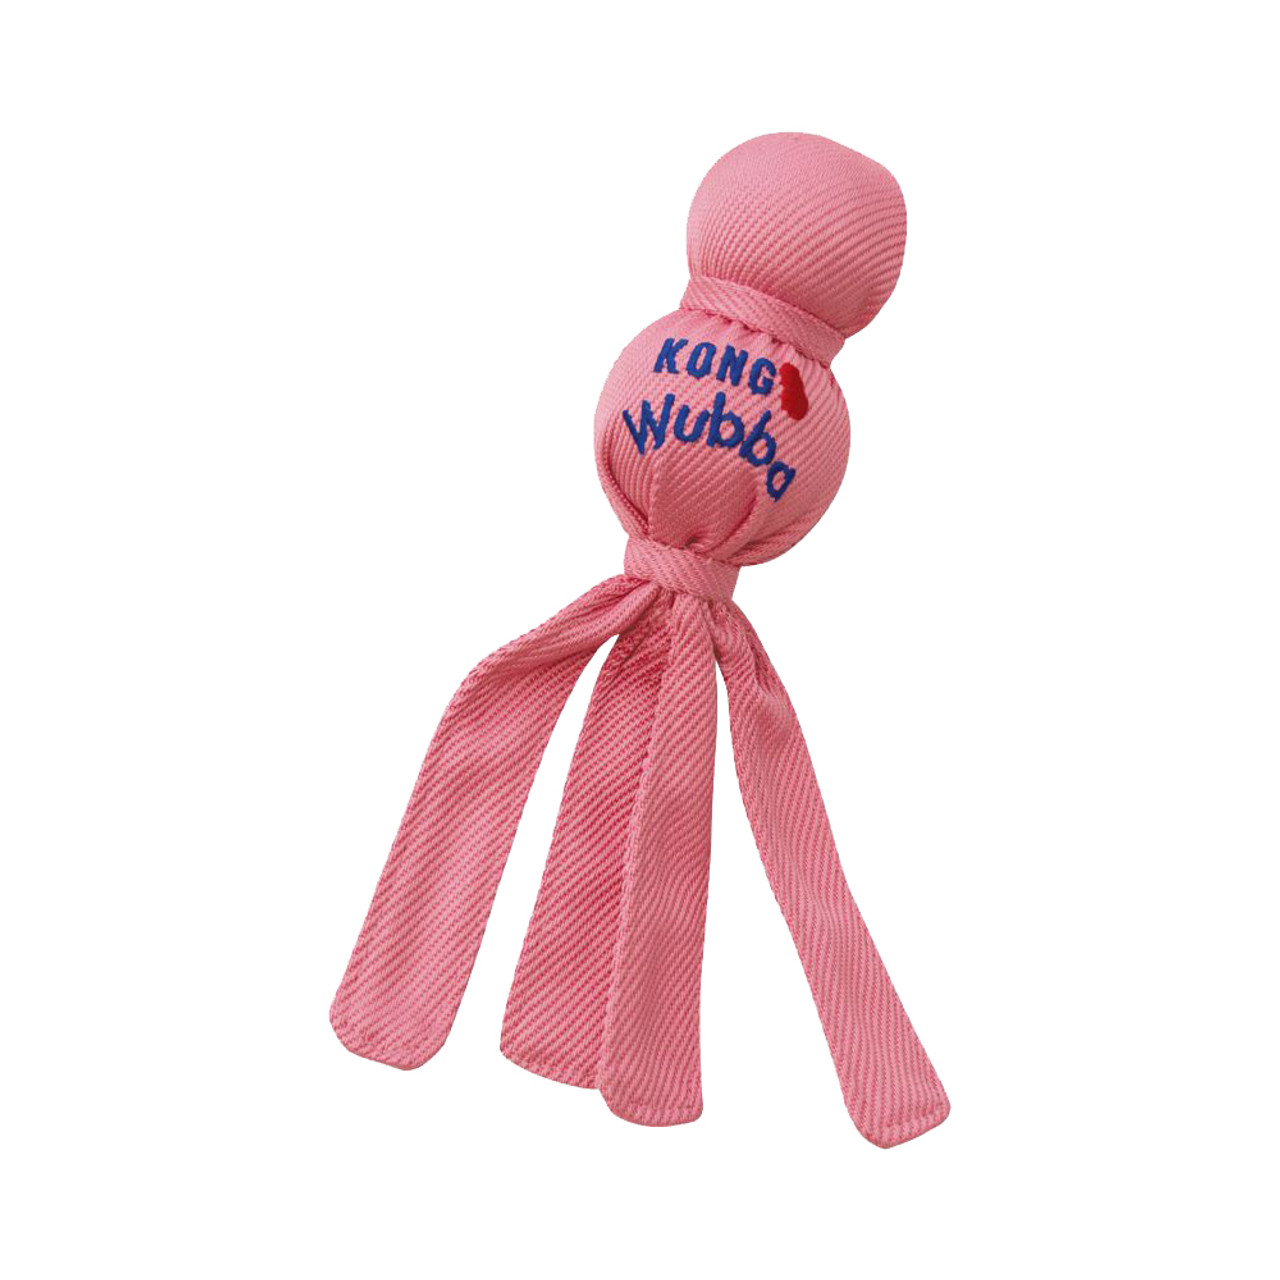 Kong Wubba Puppy Dog Toy, Assorted - Pink